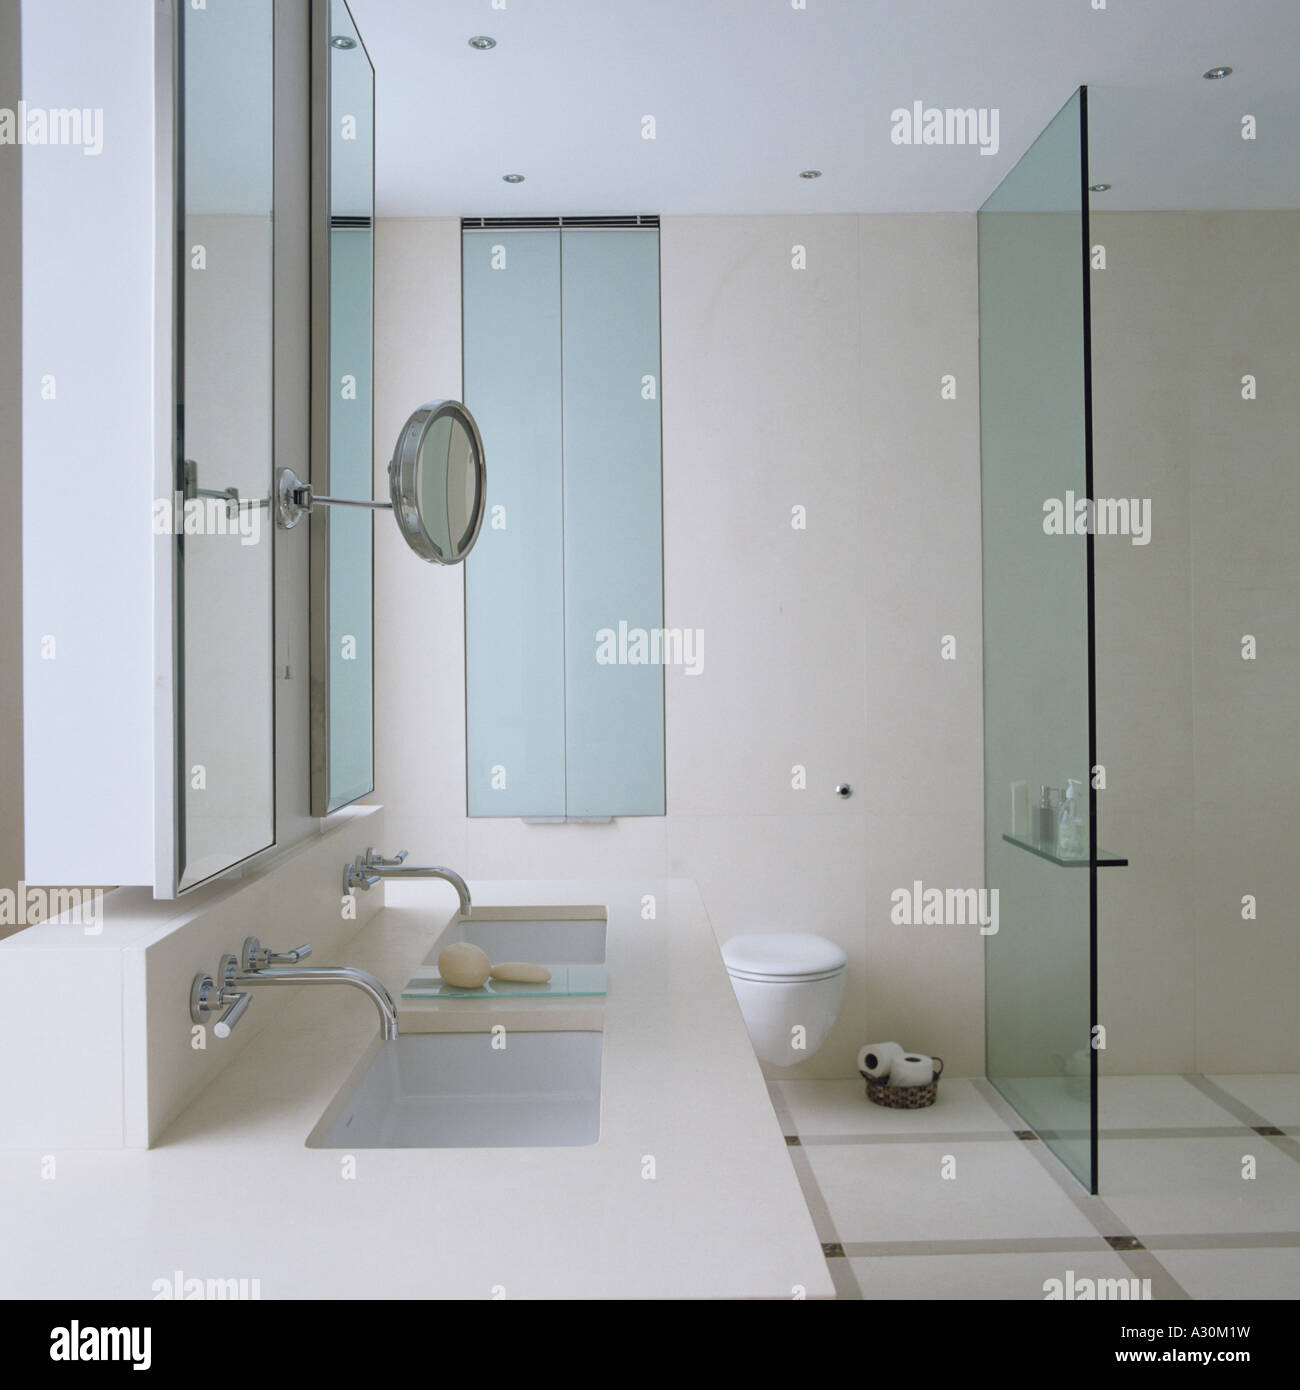 Modern bathroom with double sinks and glass shower screen Stock Photo